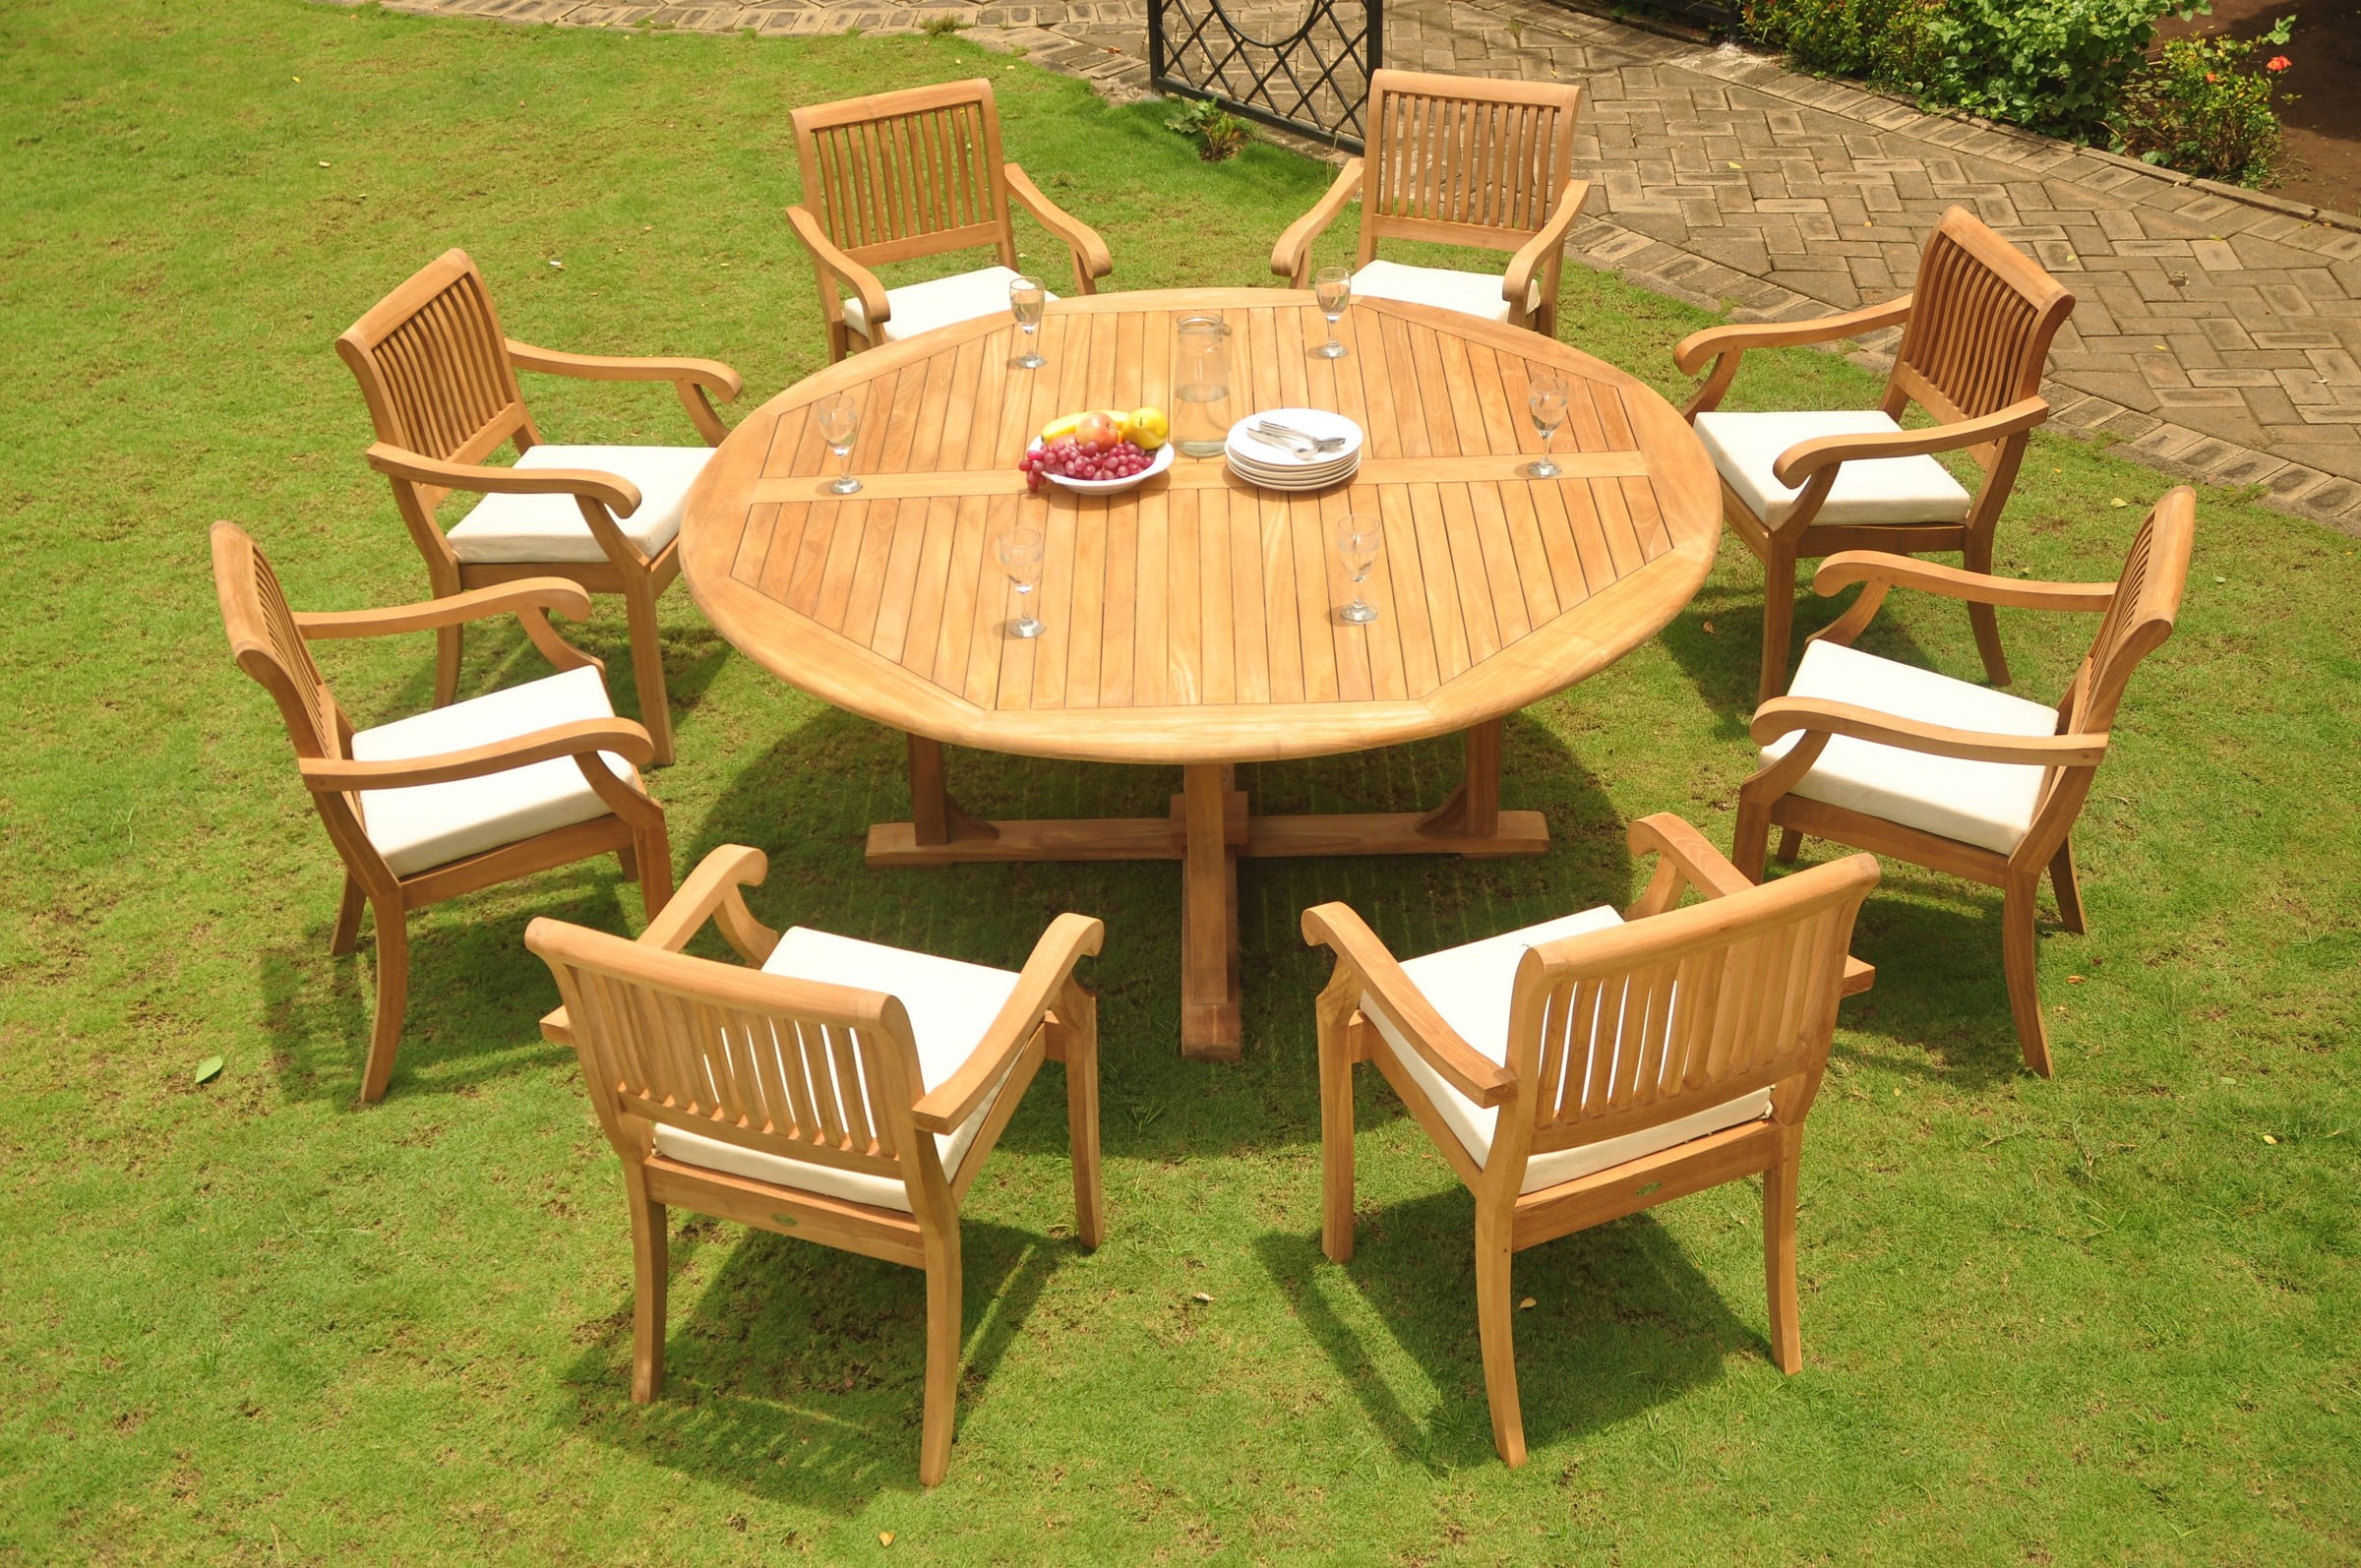 What To Look For When Buying Teak Furniture